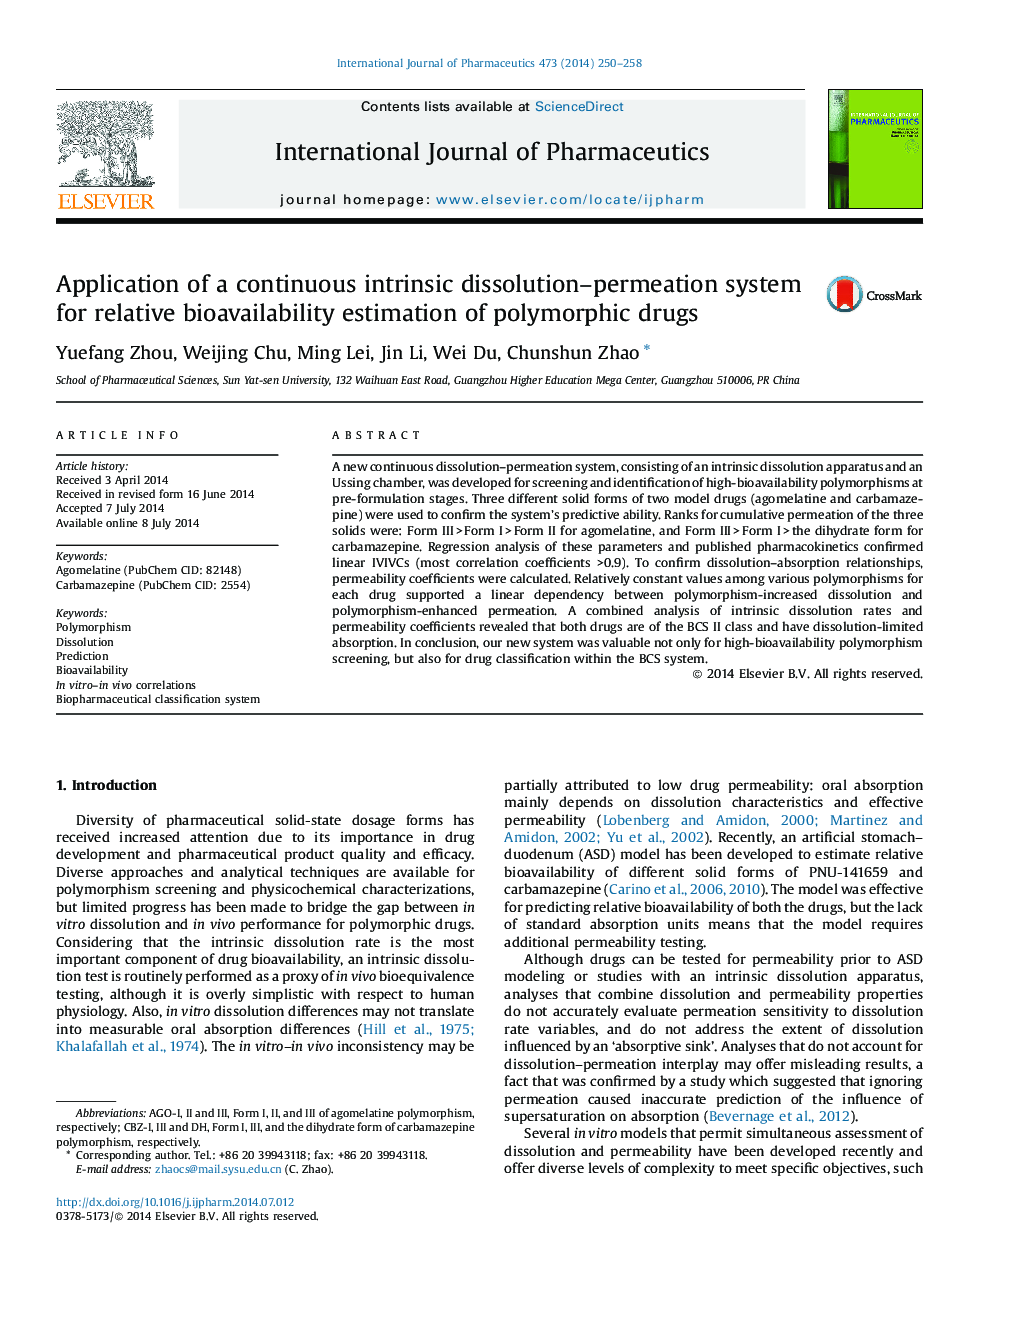 Application of a continuous intrinsic dissolution-permeation system for relative bioavailability estimation of polymorphic drugs